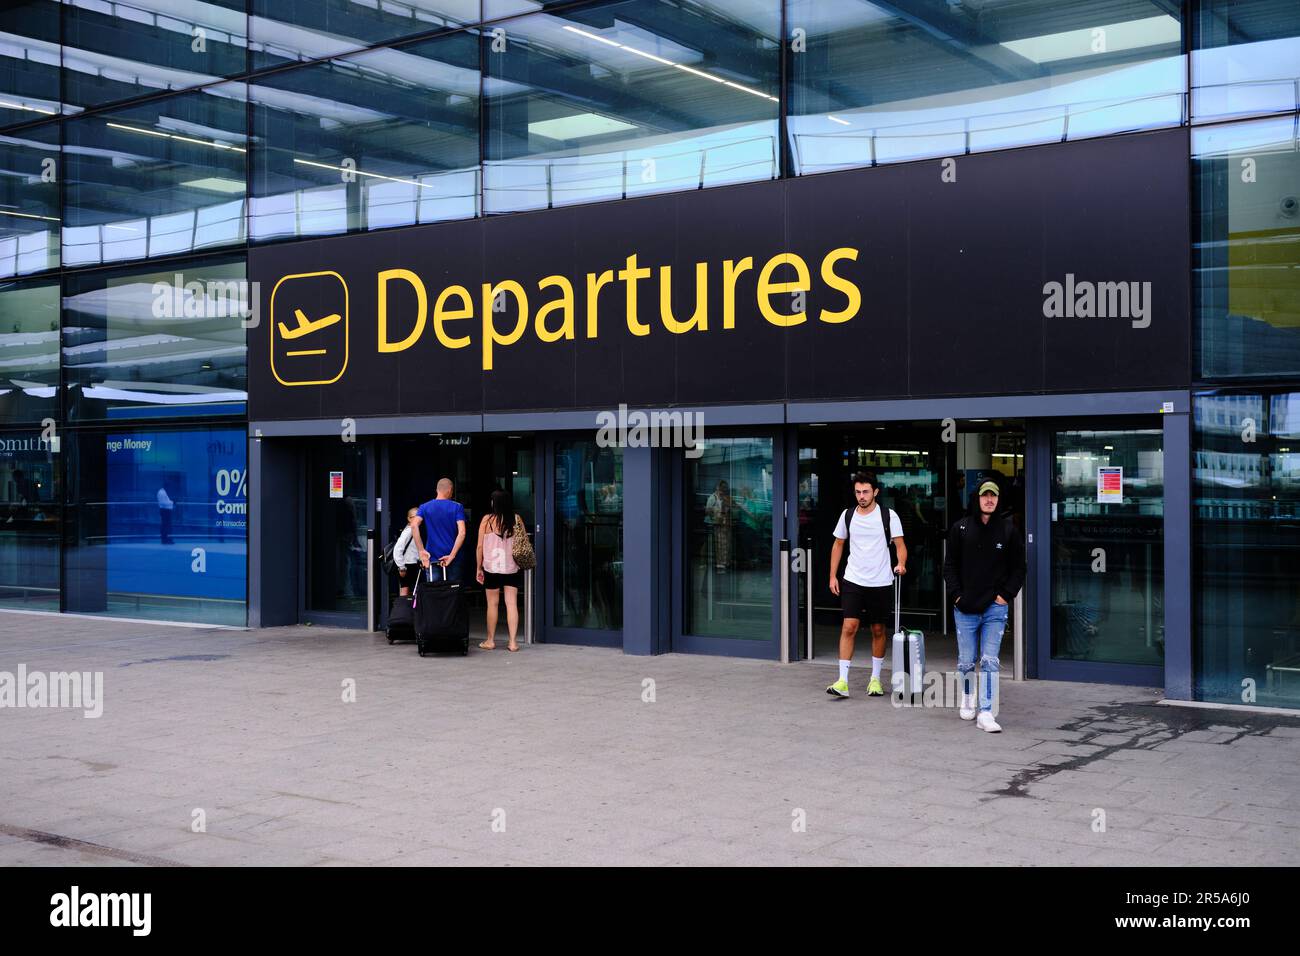 London, United Kingdom - August 22 2022: Entrance to departures at Gatwick Airport. Incidental people. Stock Photo